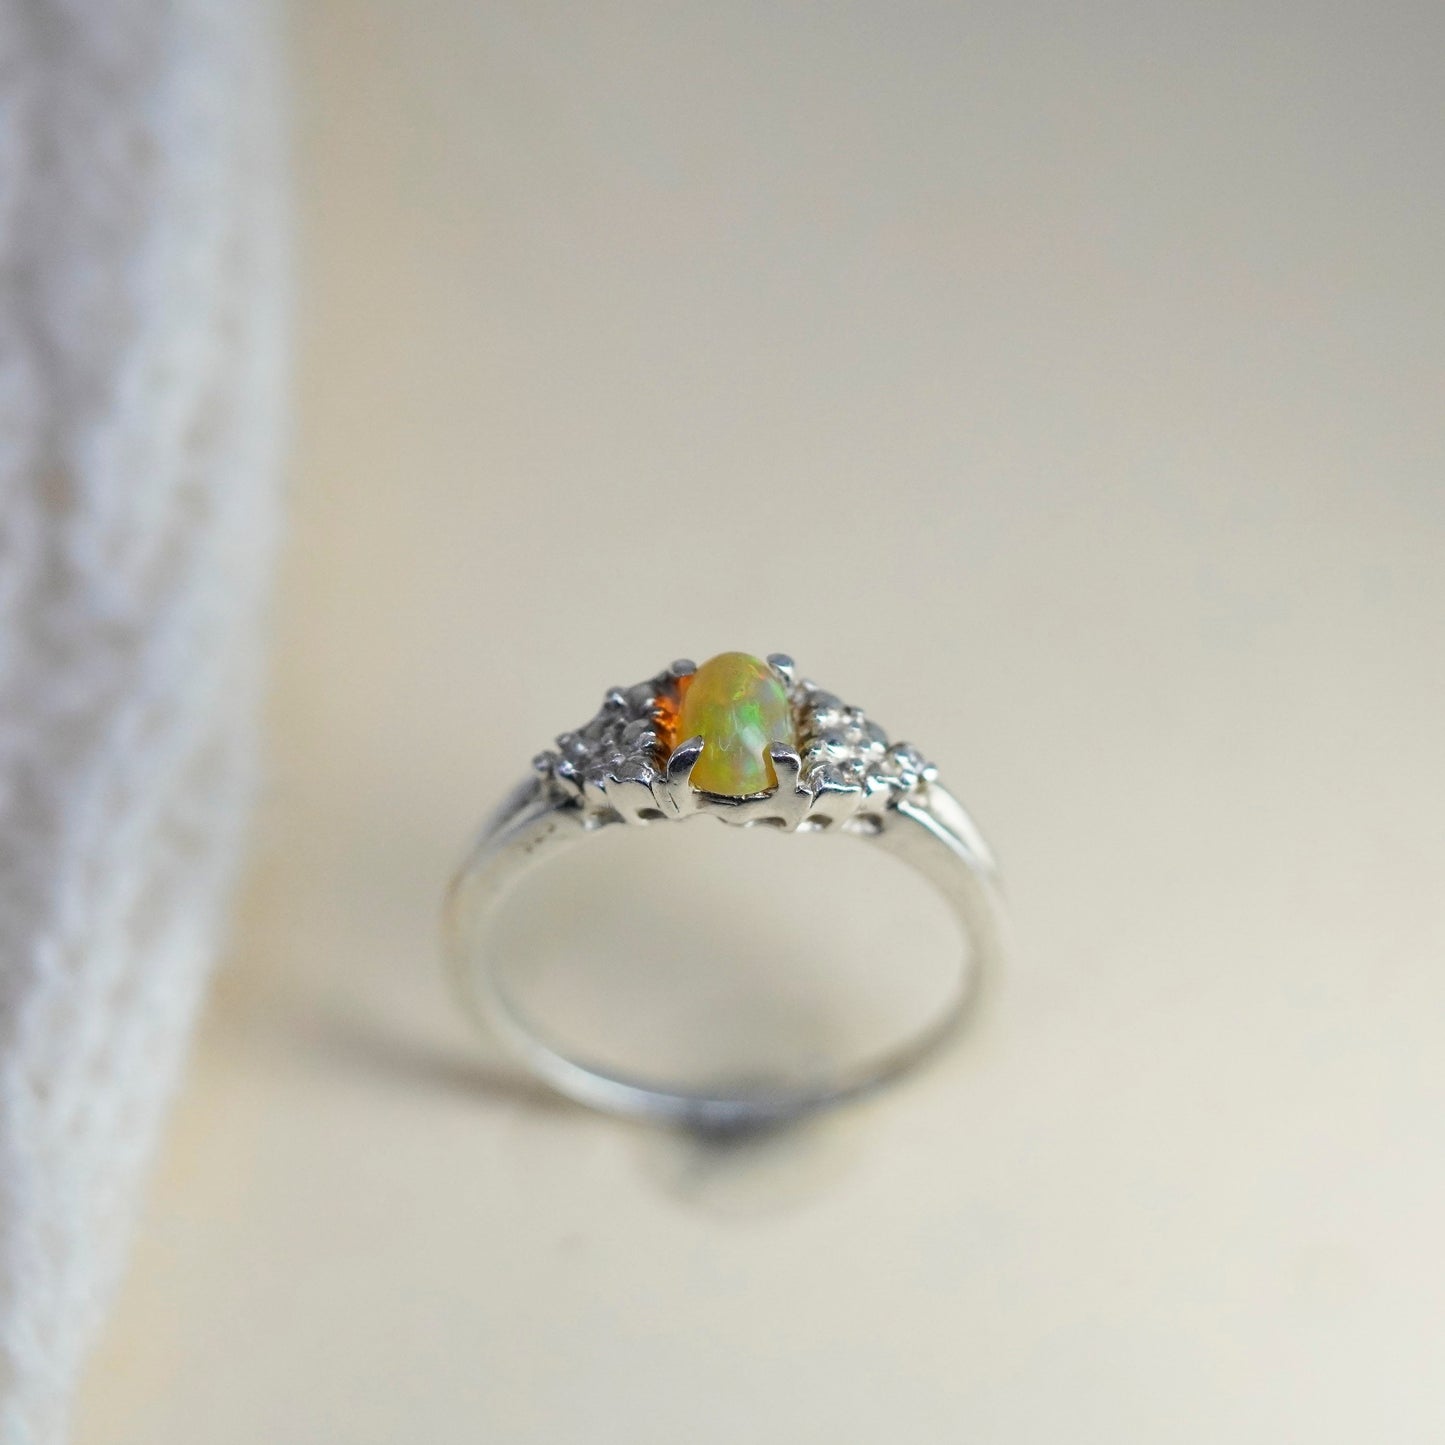 Size 7.25, vintage Sterling 925 silver handmade ring with oval opal and cz